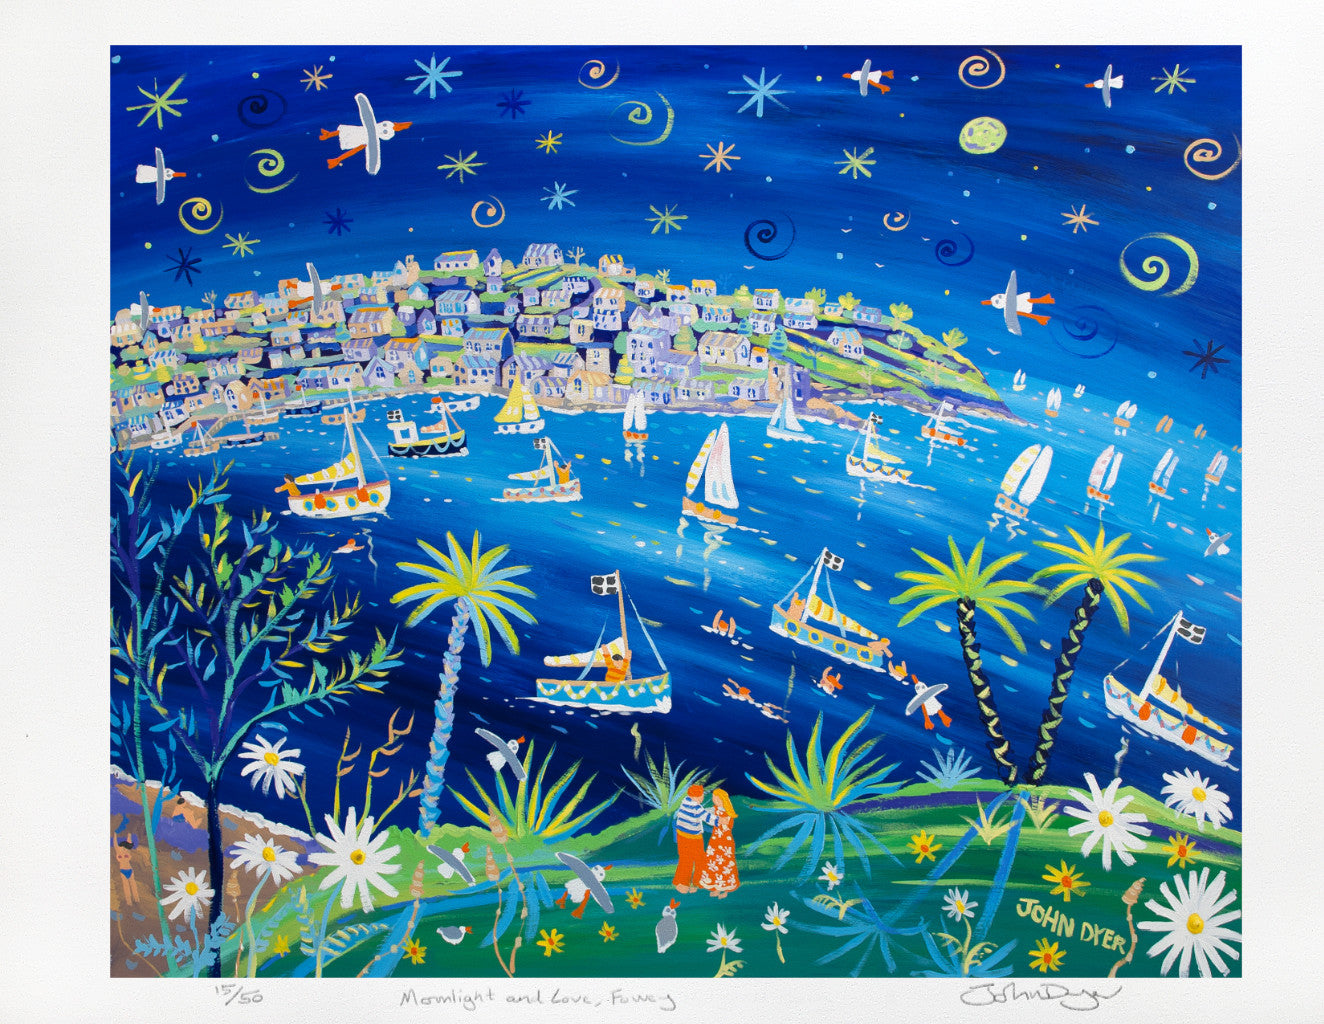 Signed Limited Edition Print by Cornish Artist John Dyer. Moonlight and Love Fowey.